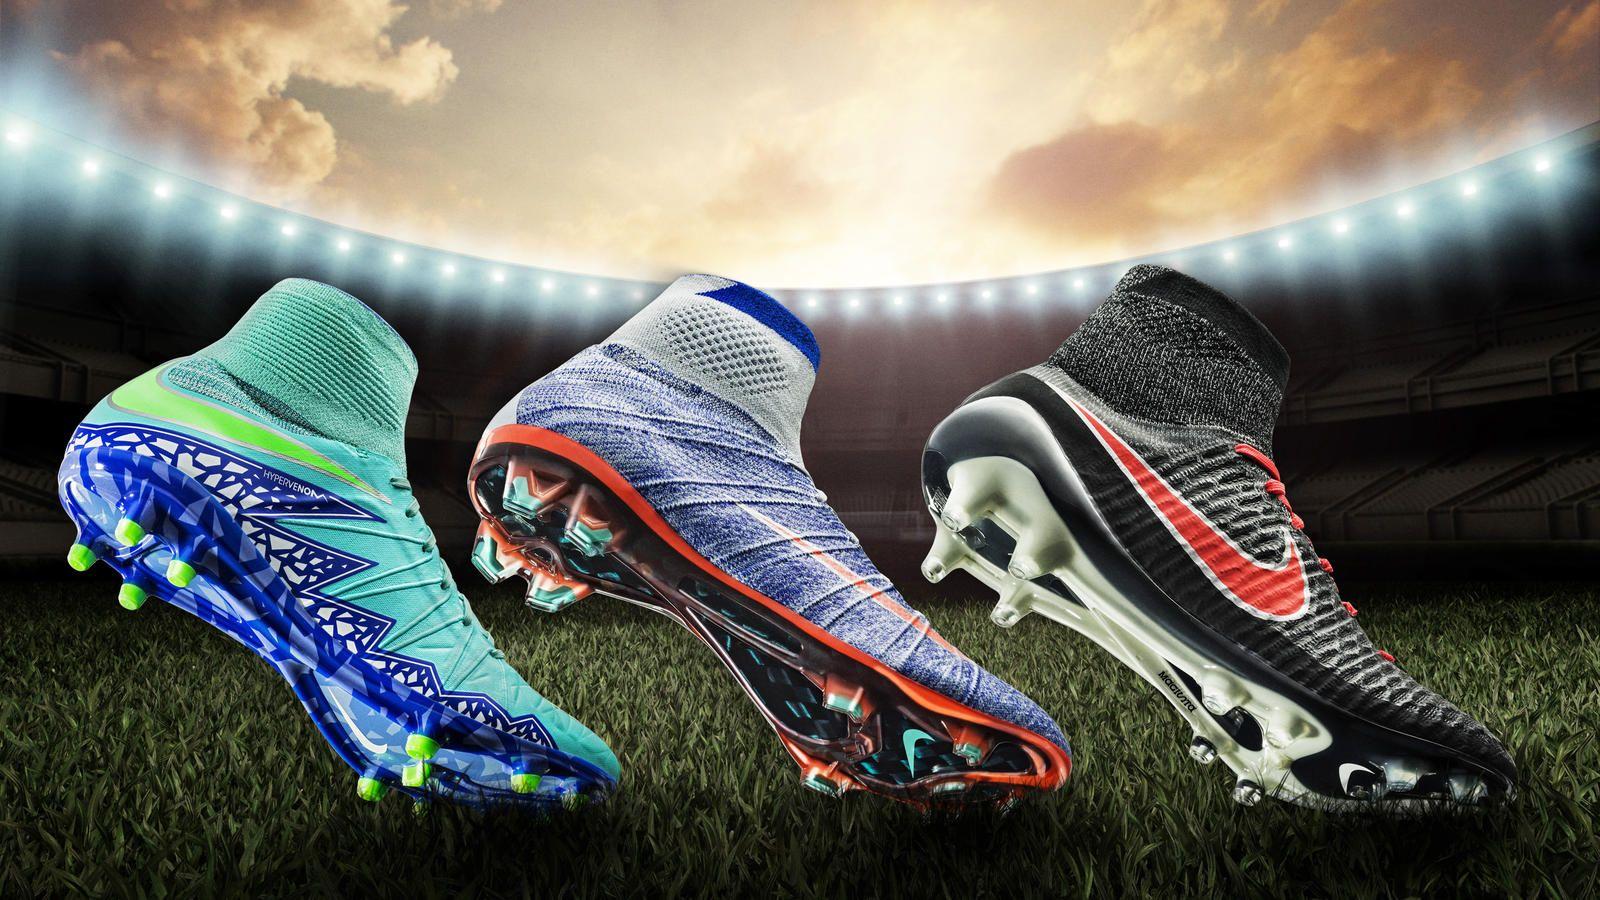 NIKE SOCCER UNVEILS ALL NEW WOMEN'S CLEAT PACK FOR 2016